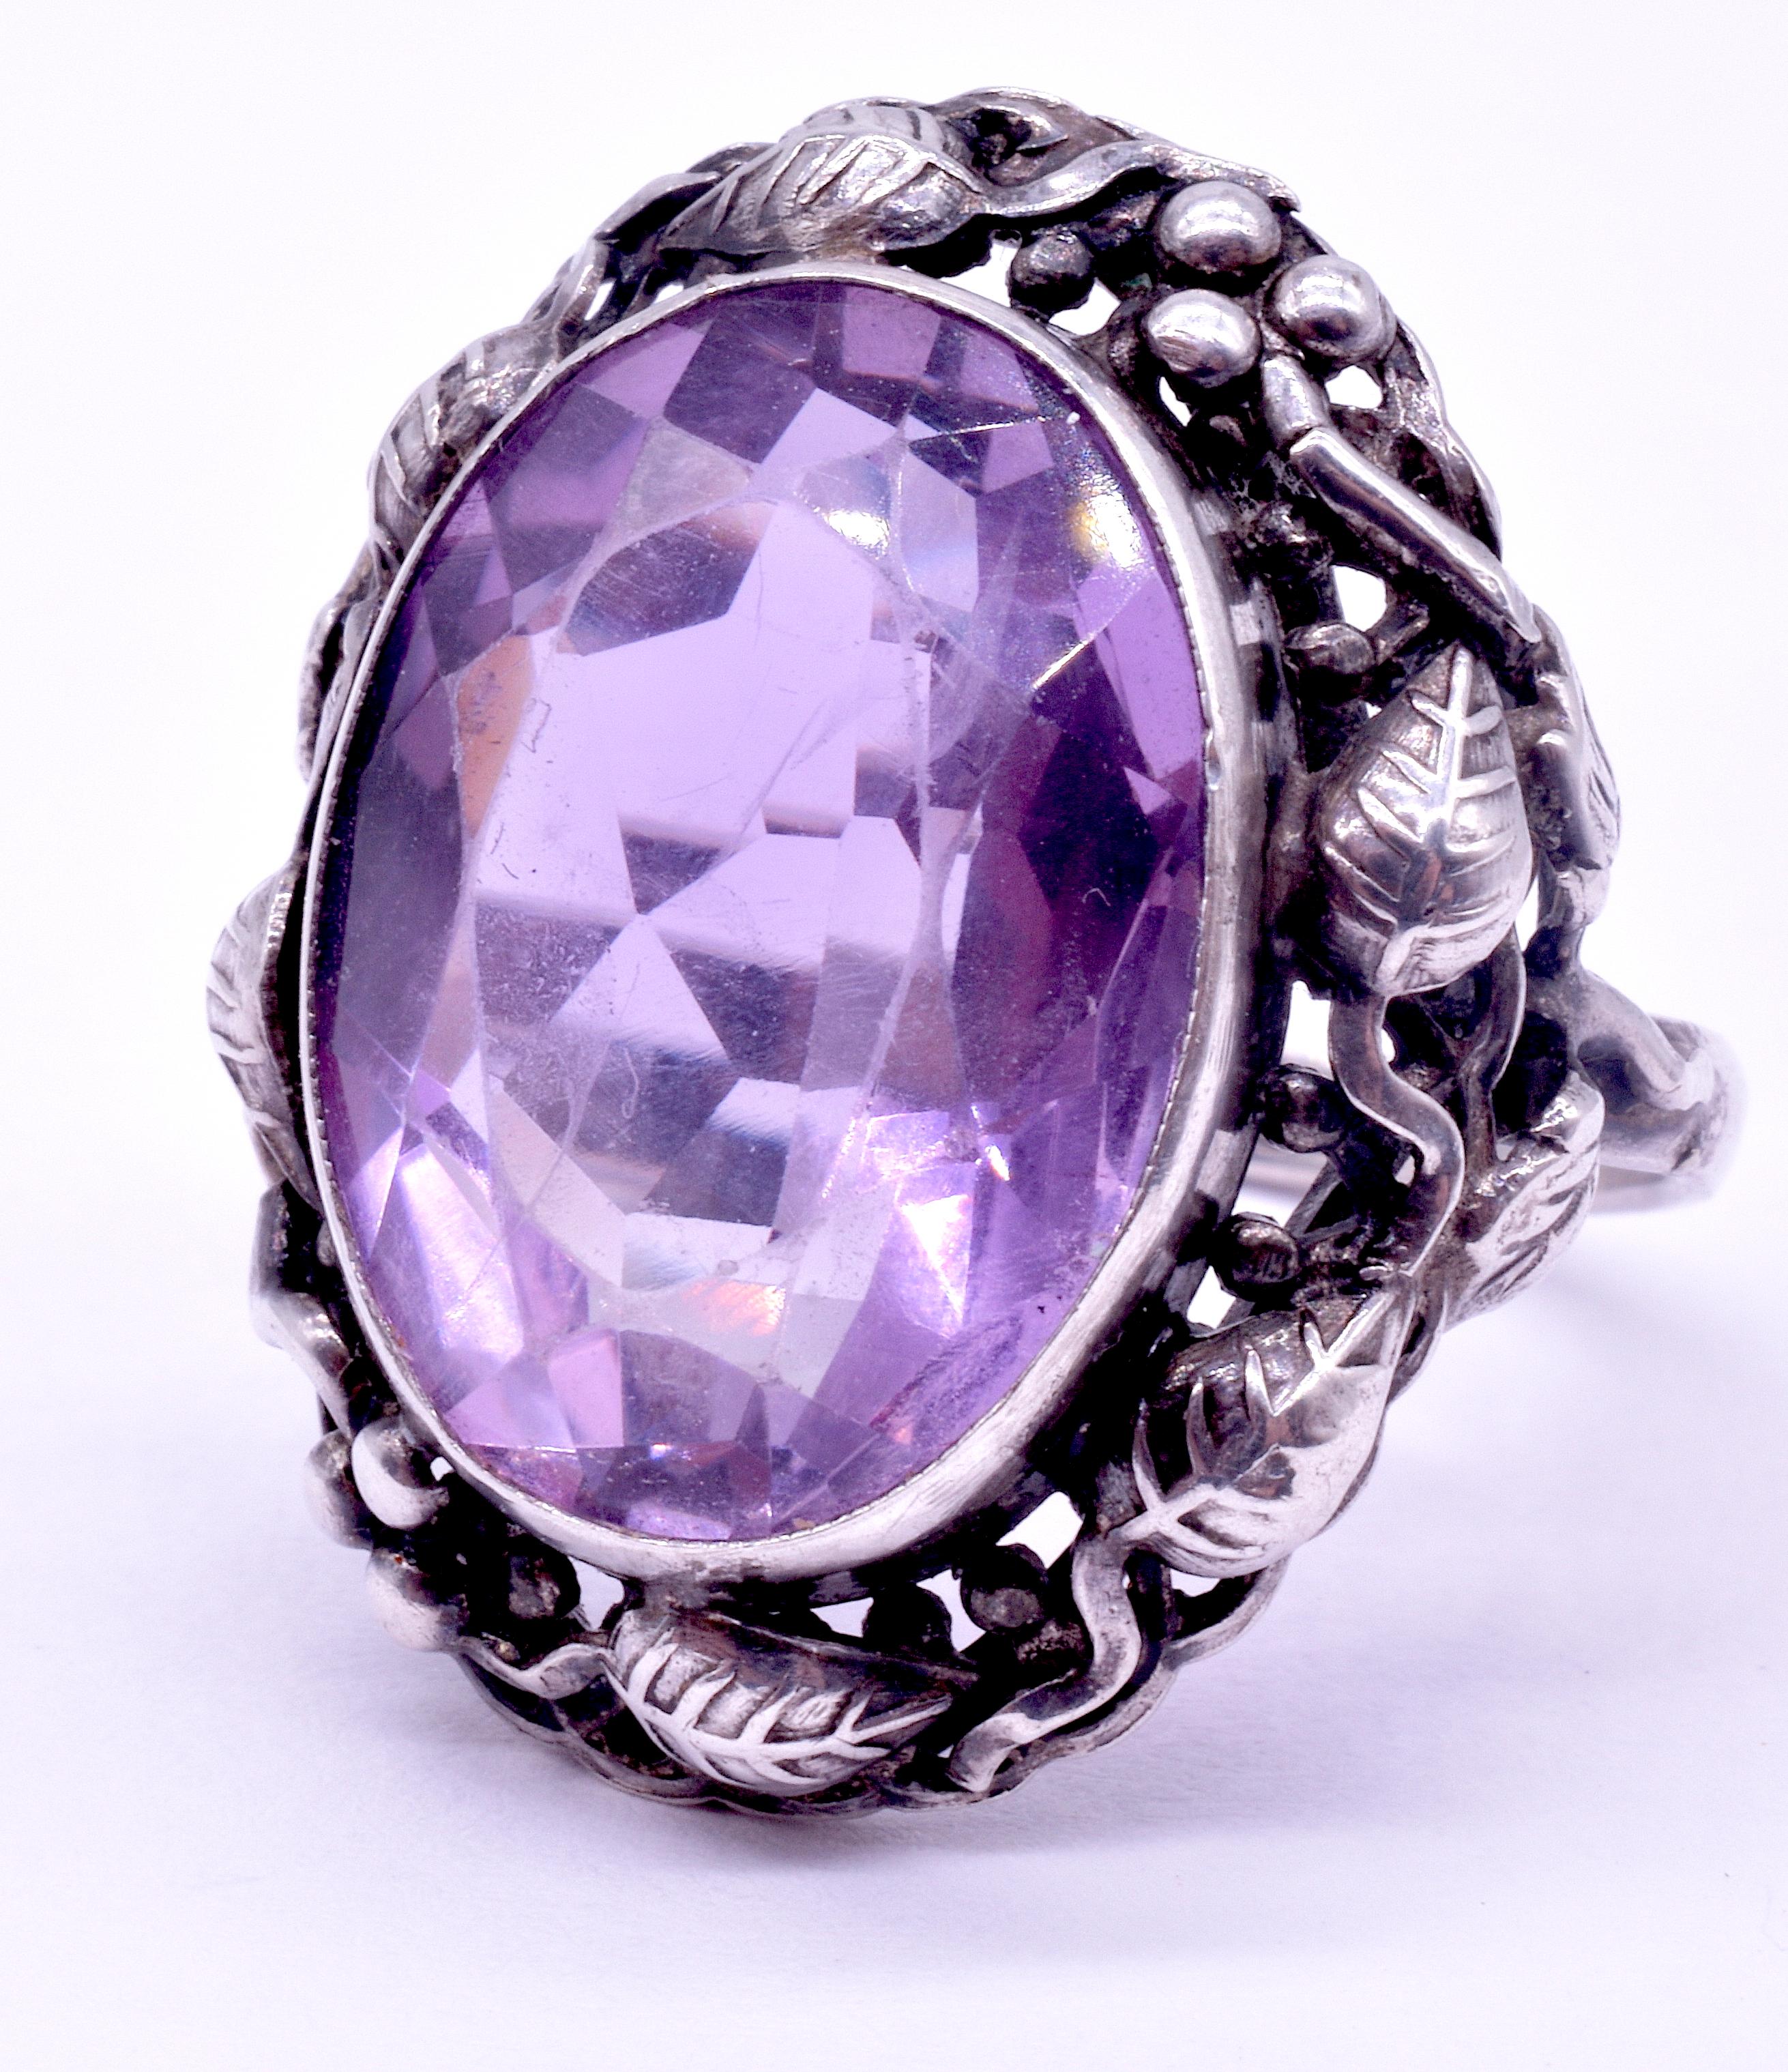 Lovely prominent amethyst ring in the Arts and Crafts style. The large and lovely amethyst is bordered by a silver border of well defined leaves - even the veining of the leaves can be seen, along with the round fruit of the branch. Theory behind